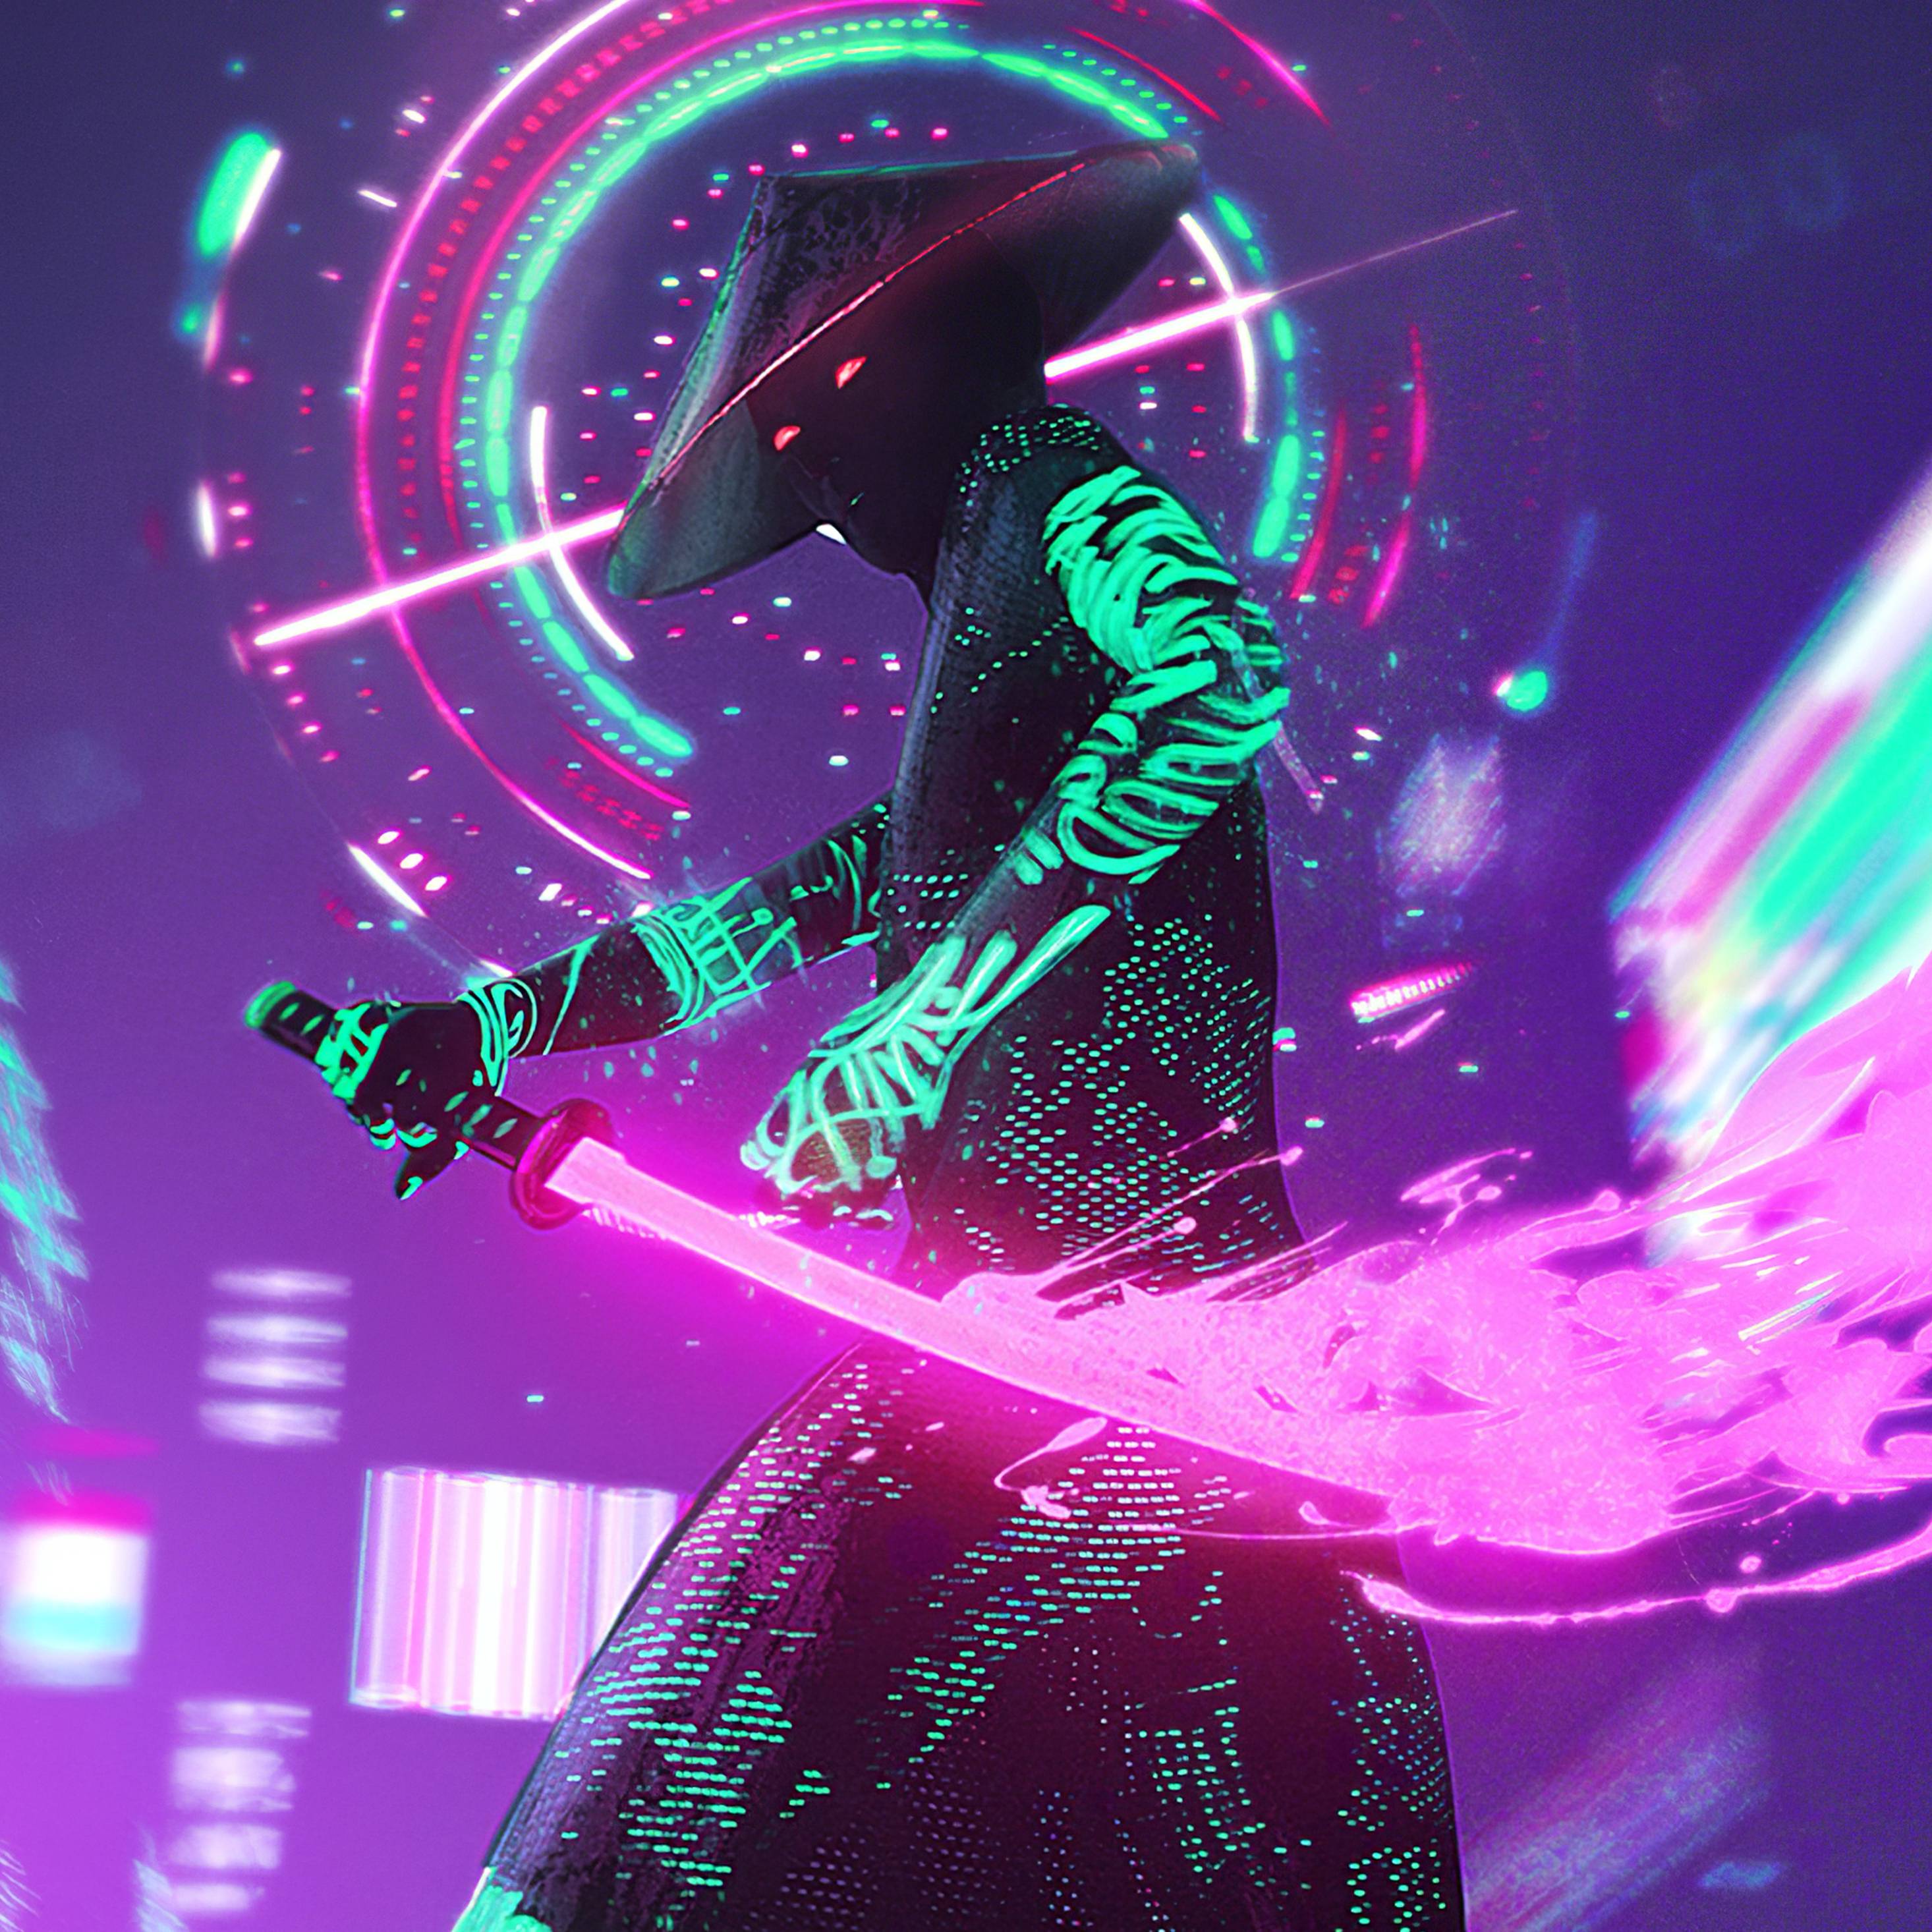 Cyberpunk Neon With Sword 4k iPad Pro Retina Display HD 4k Wallpaper, Image, Background, Photo and Picture